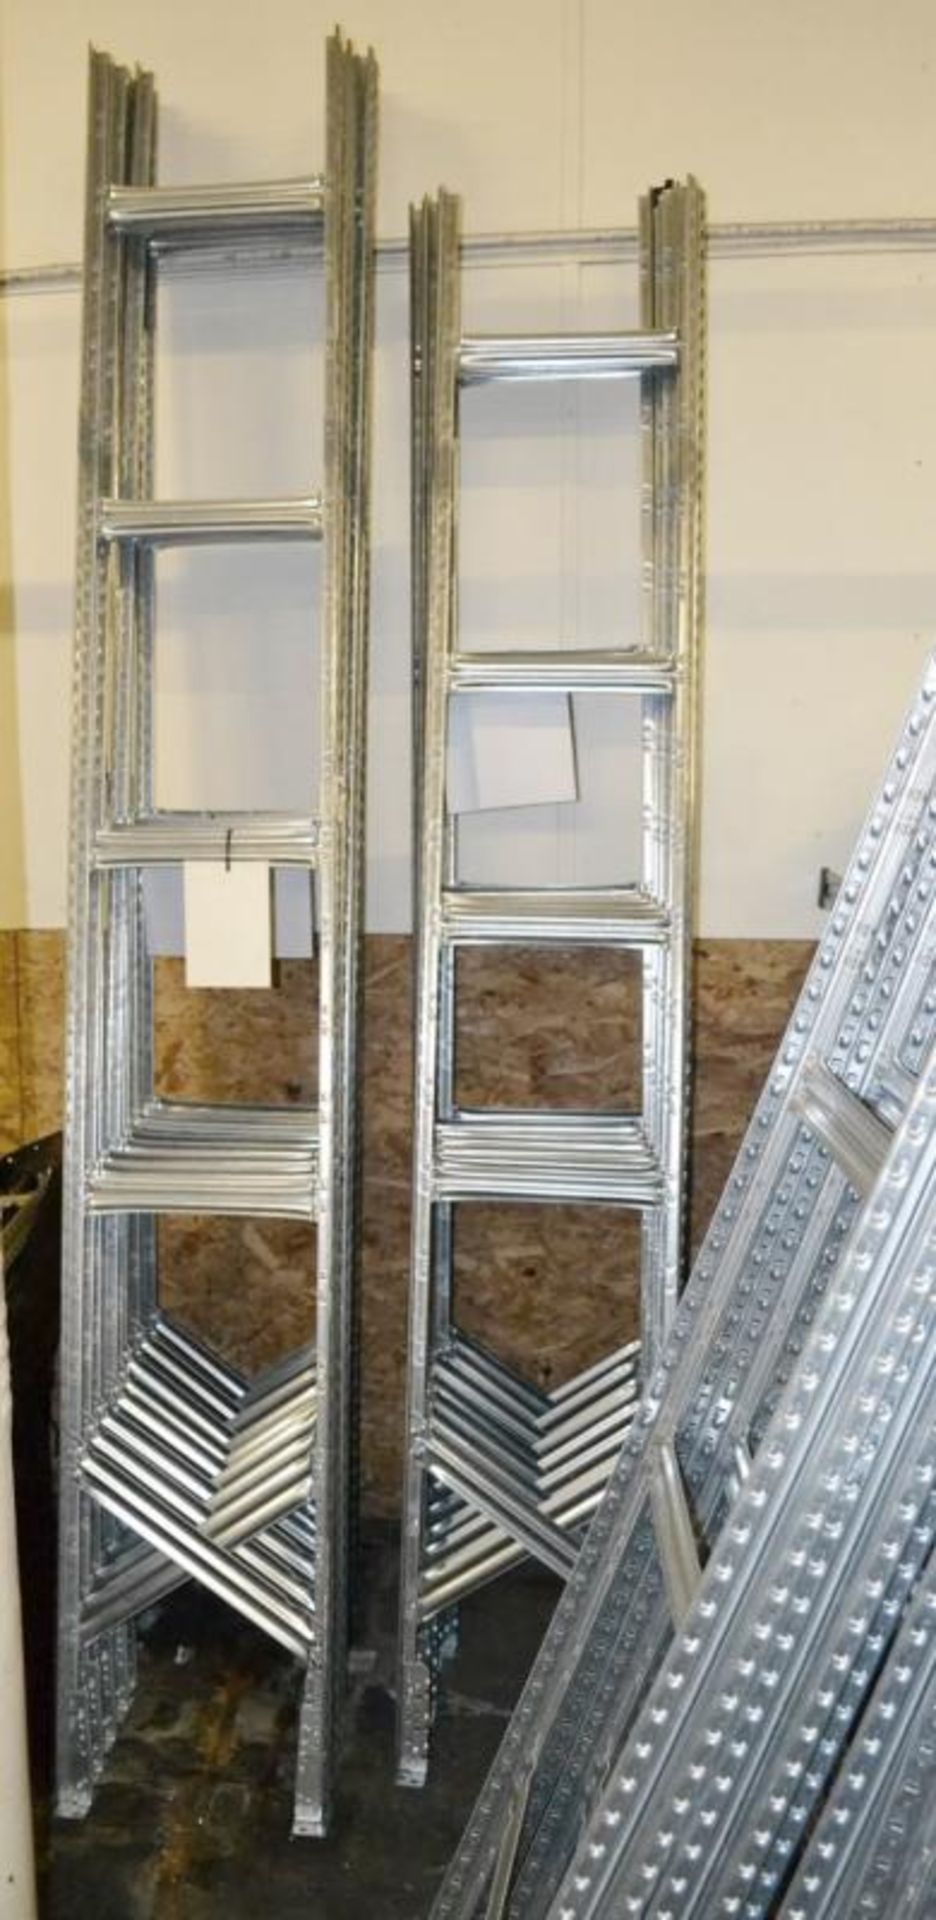 4 x Bays of Metalsistem Steel Modular Storage Shelving - Includes 53 Pieces - Recently Removed - Image 17 of 17